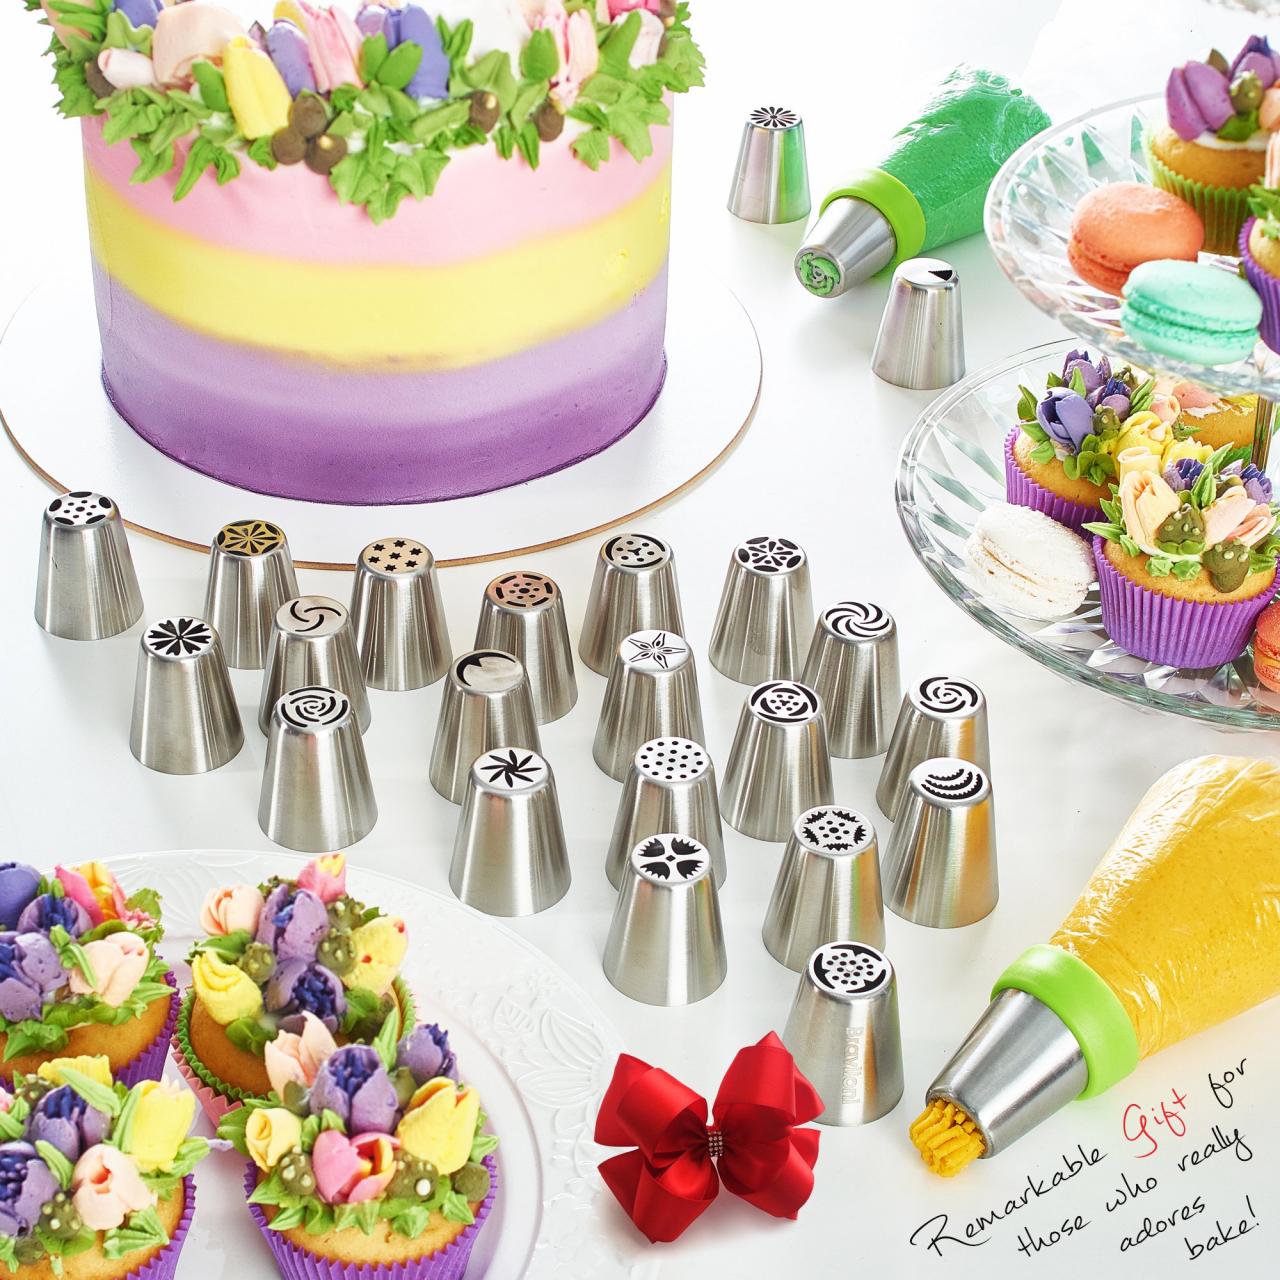 Cake decoration suppliers